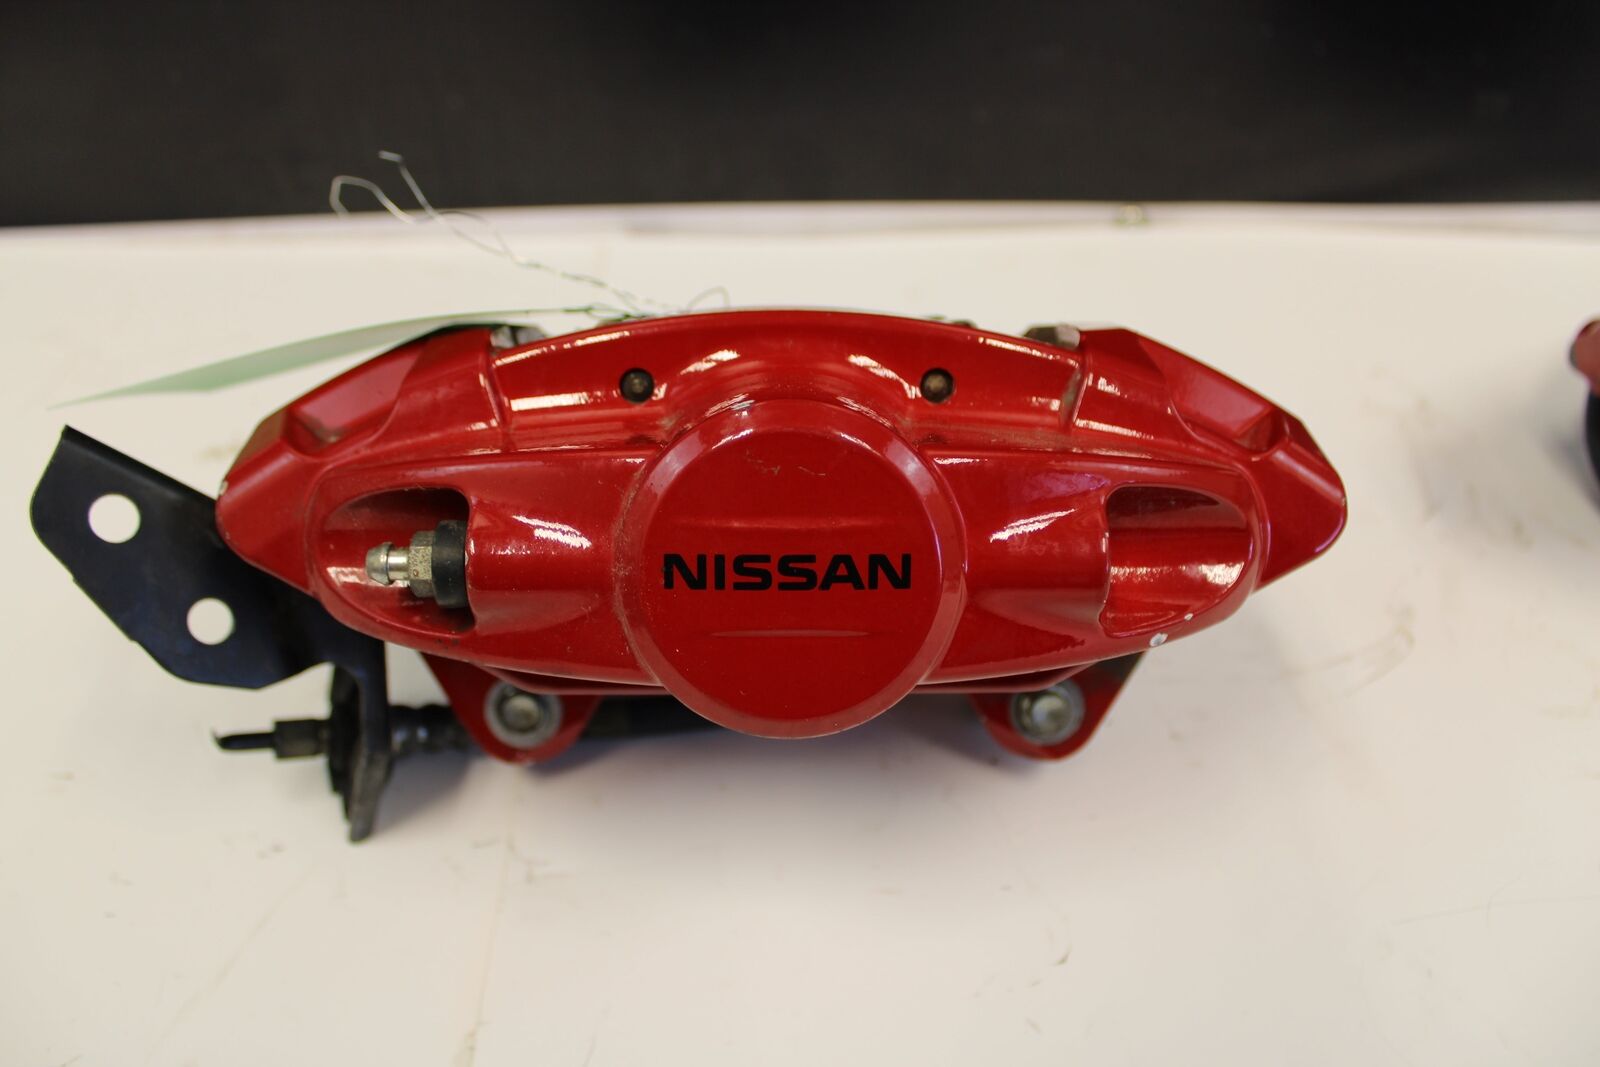 NISSAN 370Z AKEBONO CALIPERS FRONT REAR SET 2009-2020 OEM RED